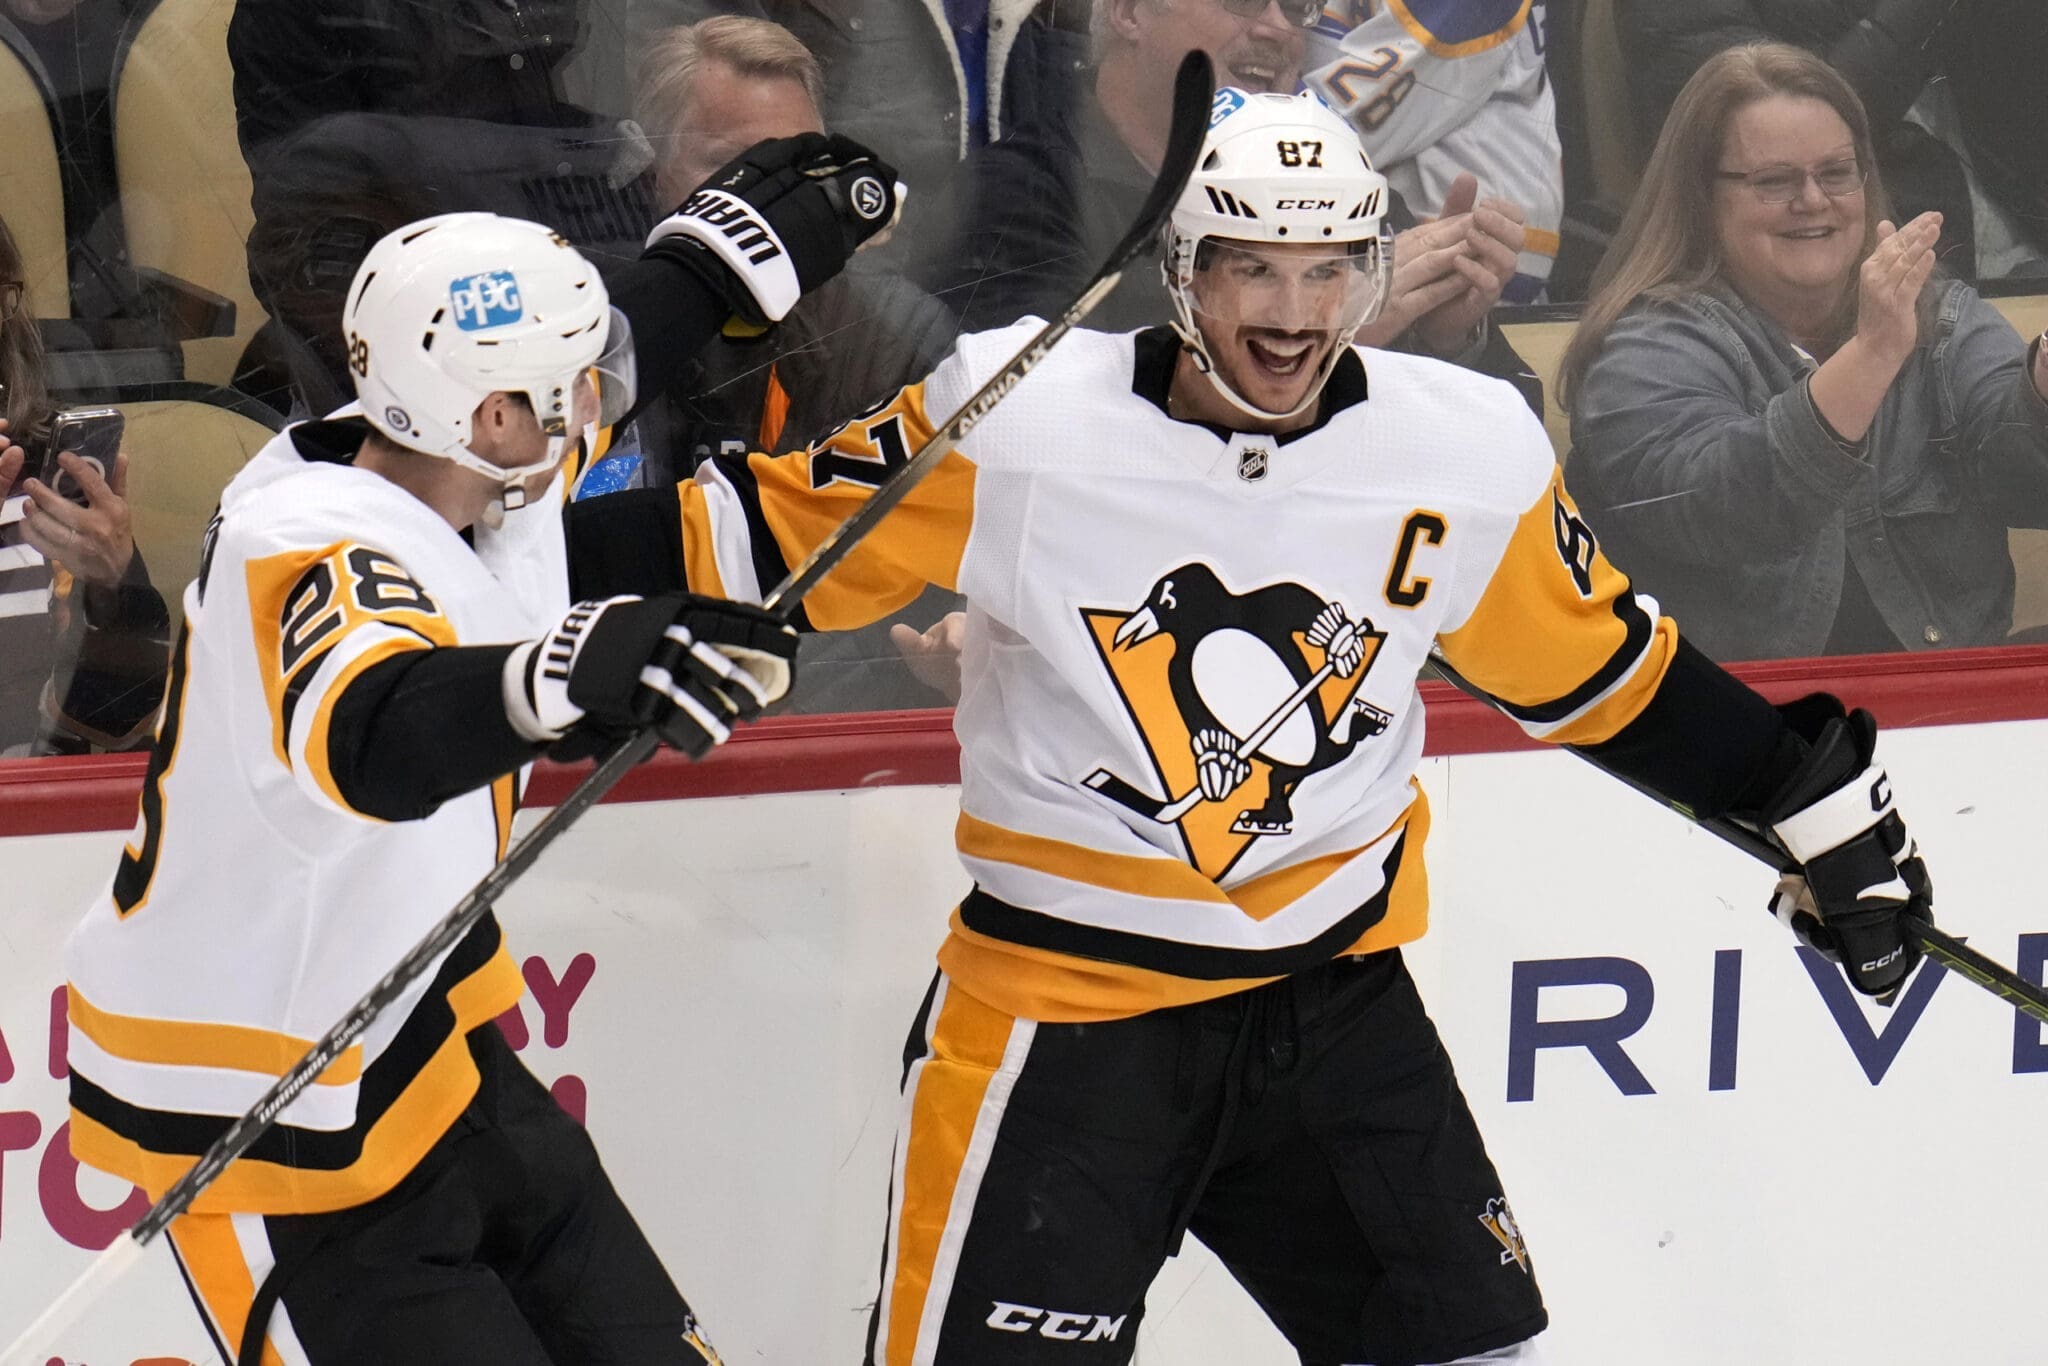 Pittsburgh Penguins, Sidney Crosby, Marcus Pettersson